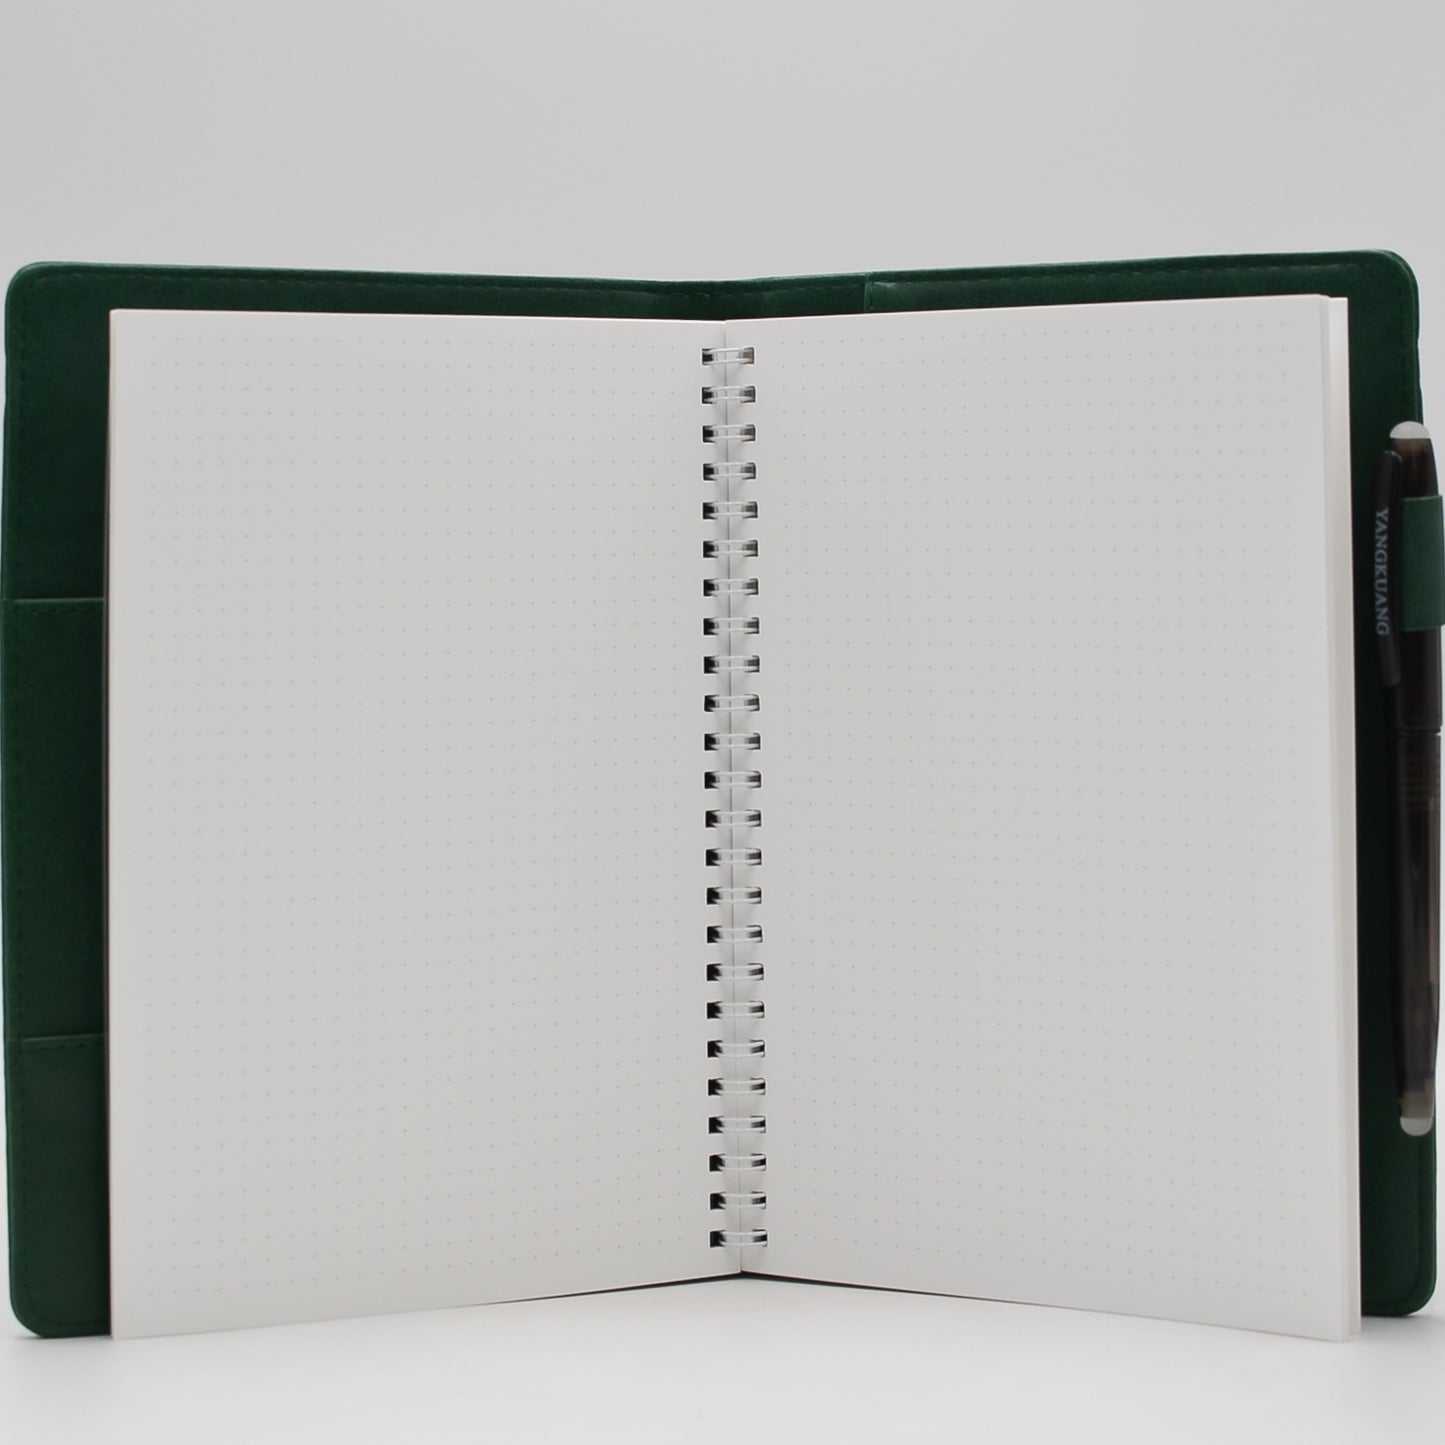 Journals: Re-useable Set includes Faux Leather Cover, Reuse-able Journal